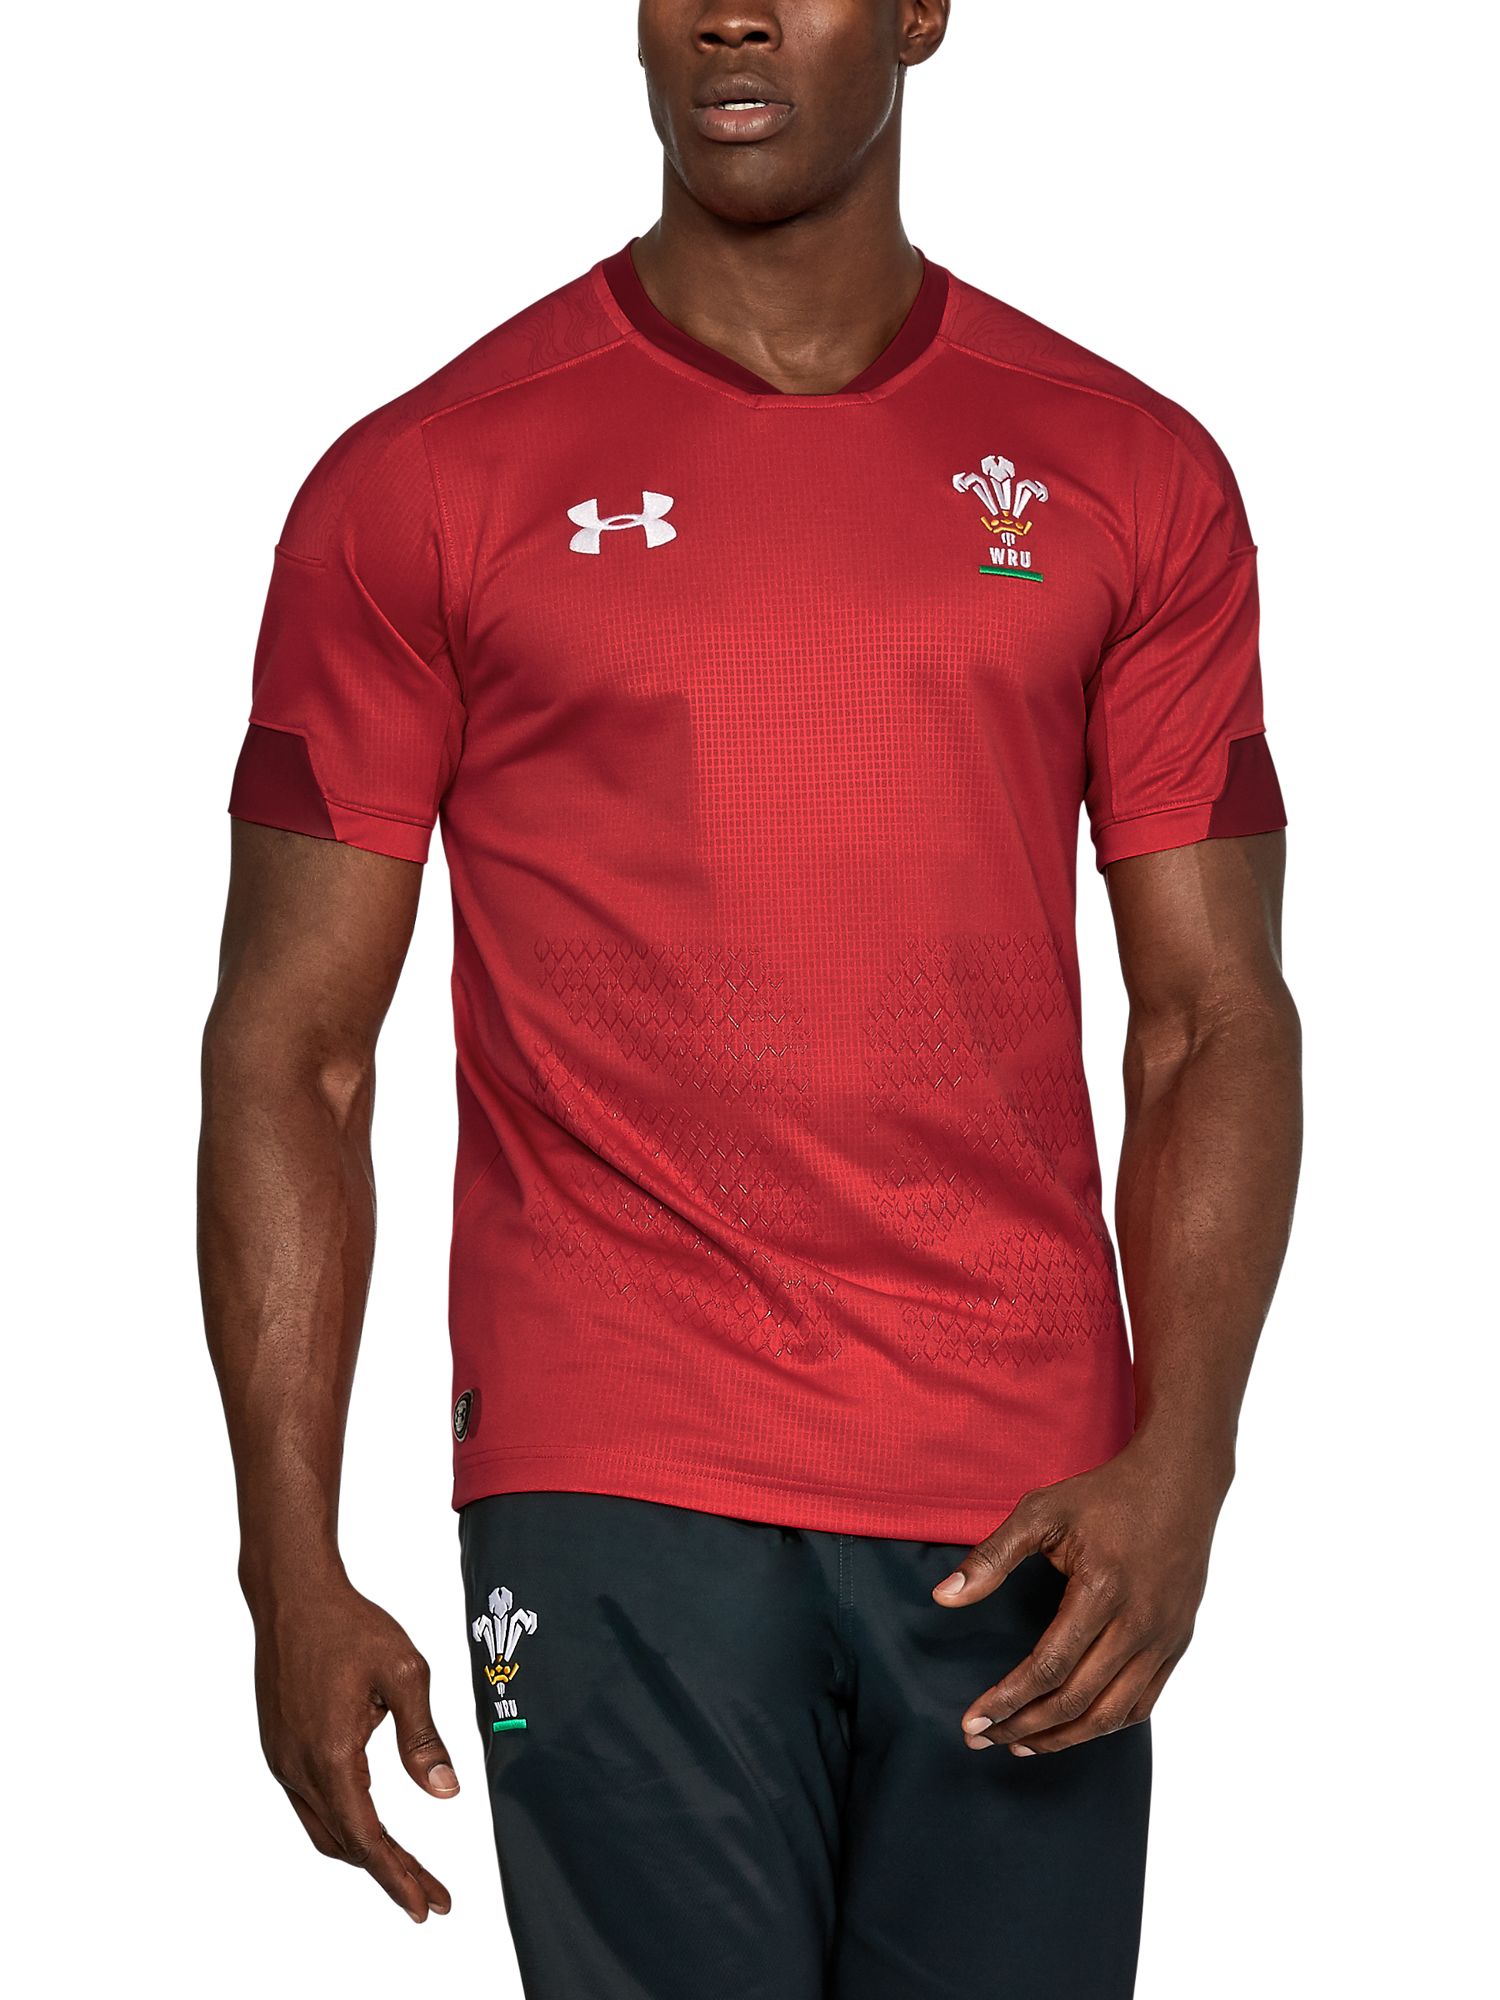 Welsh Rugby Union Supporters Shirt, Red 